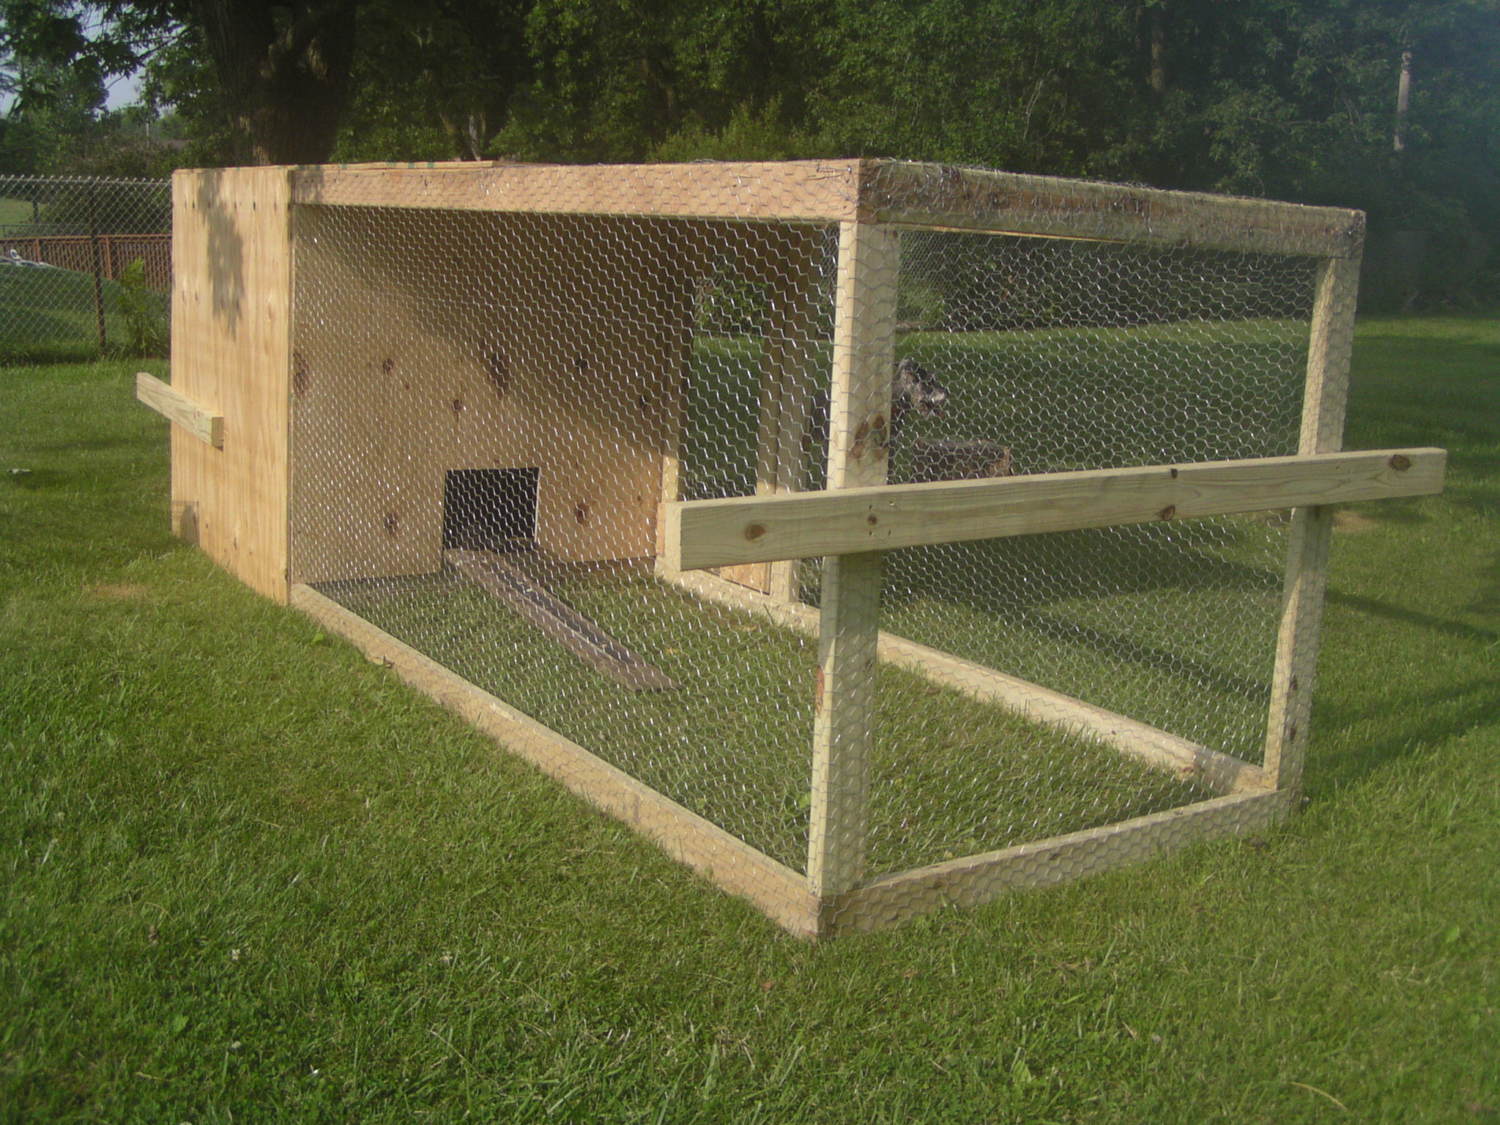 Newbie Needs Advice for Building a Chicken Tractor/Coop